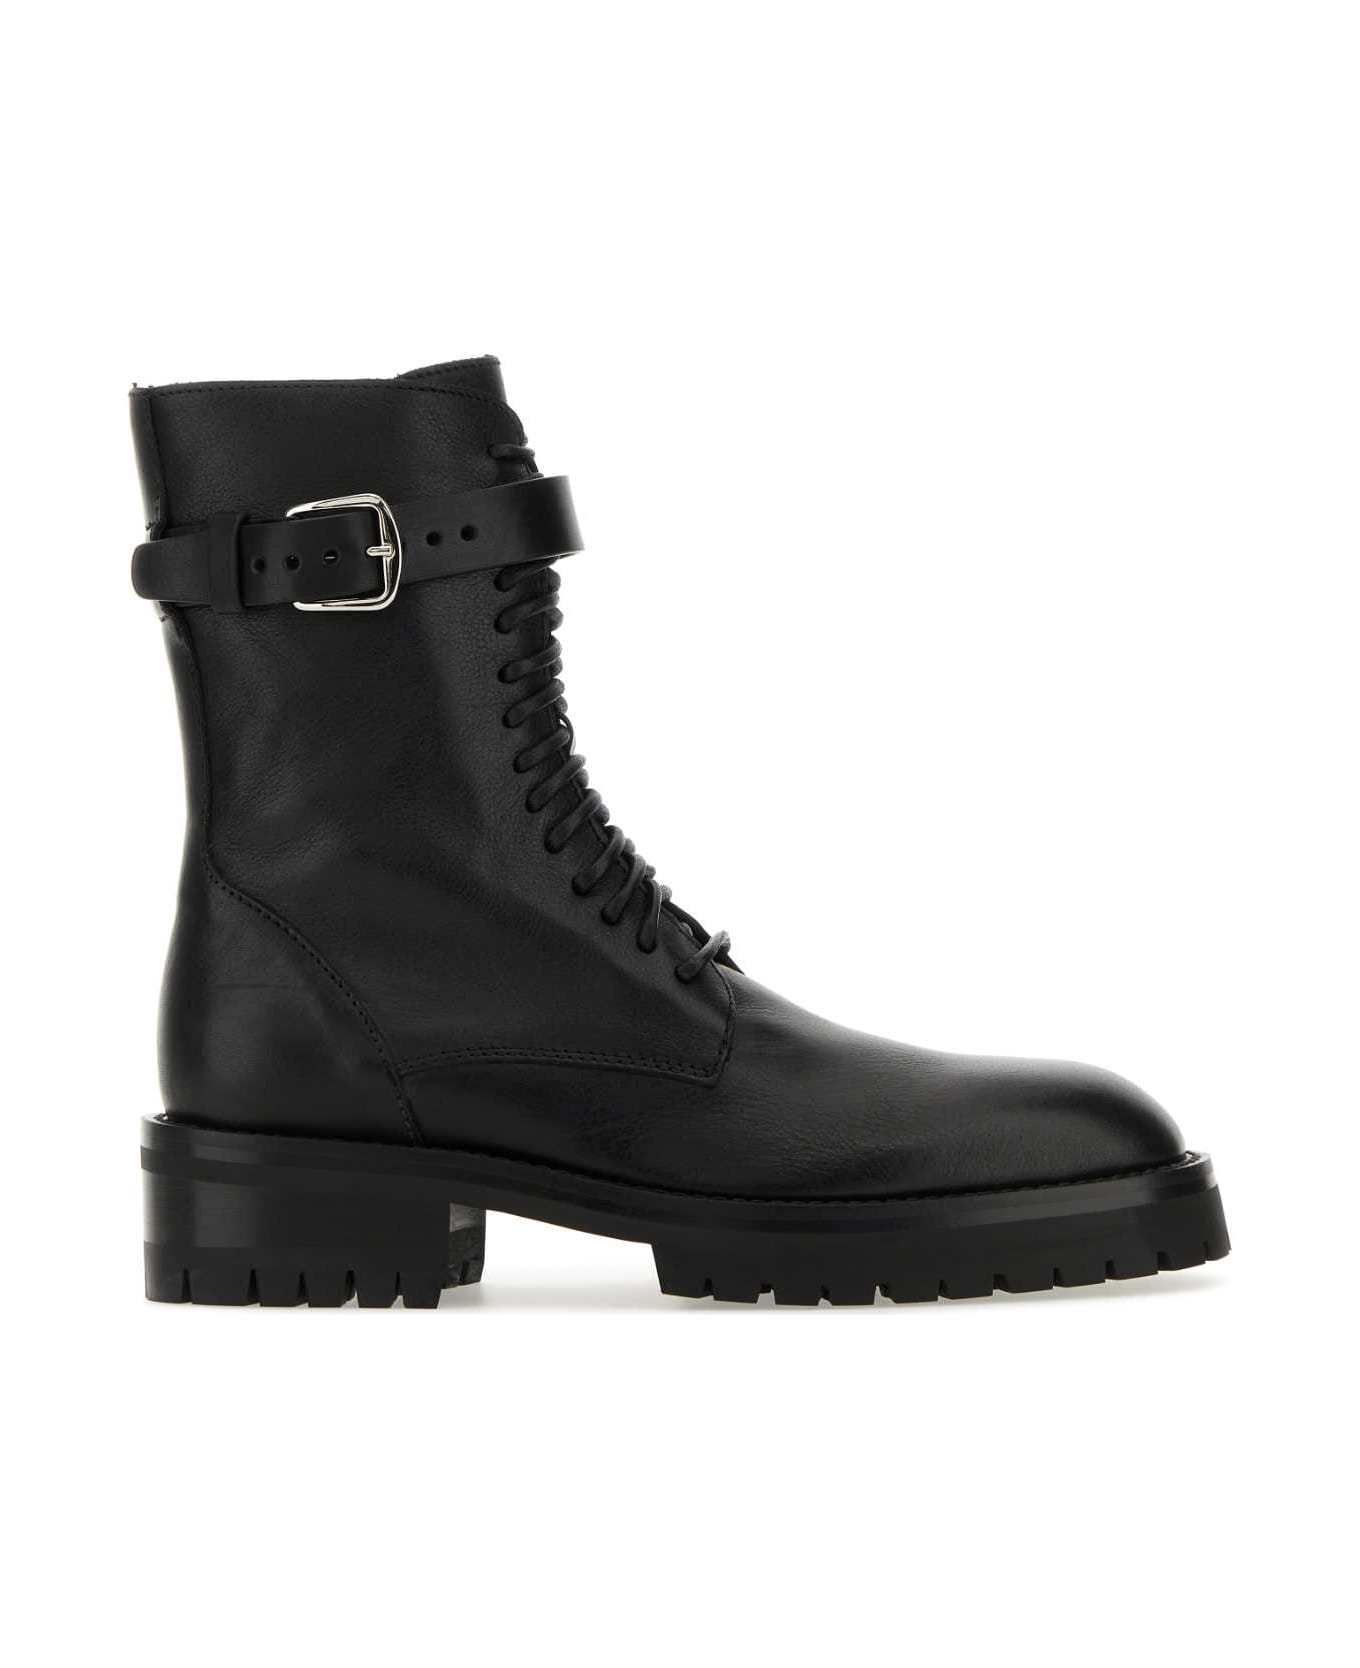 Ann Demeulemeester Black Leather Ankle Boots - BLACK